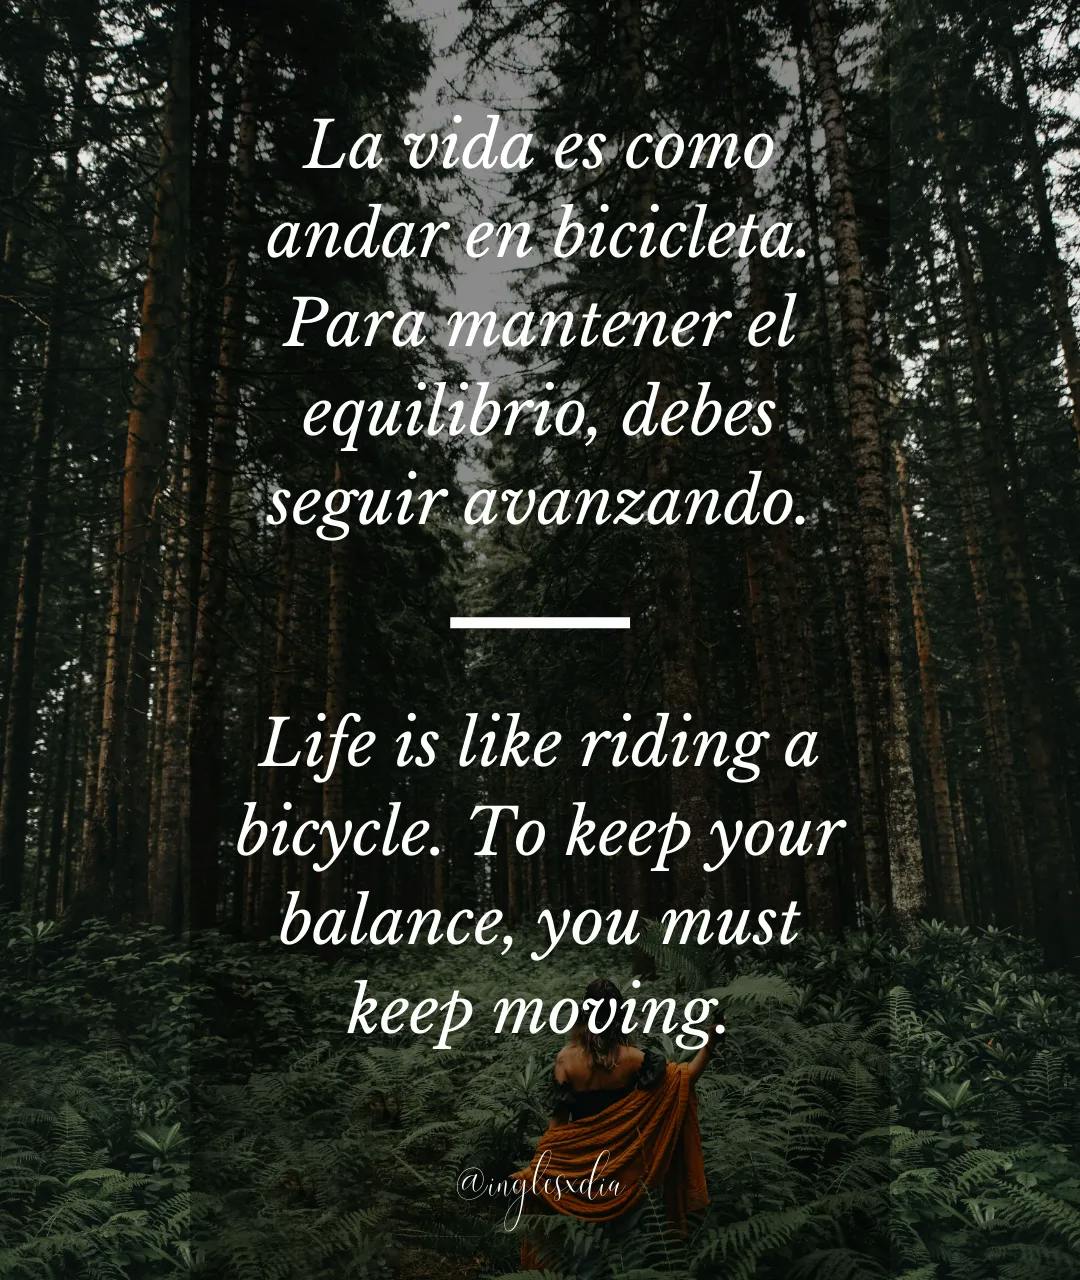 Frases motivadoras en inglés: Life is like riding a bicycle. To keep your balance, you must keep moving.